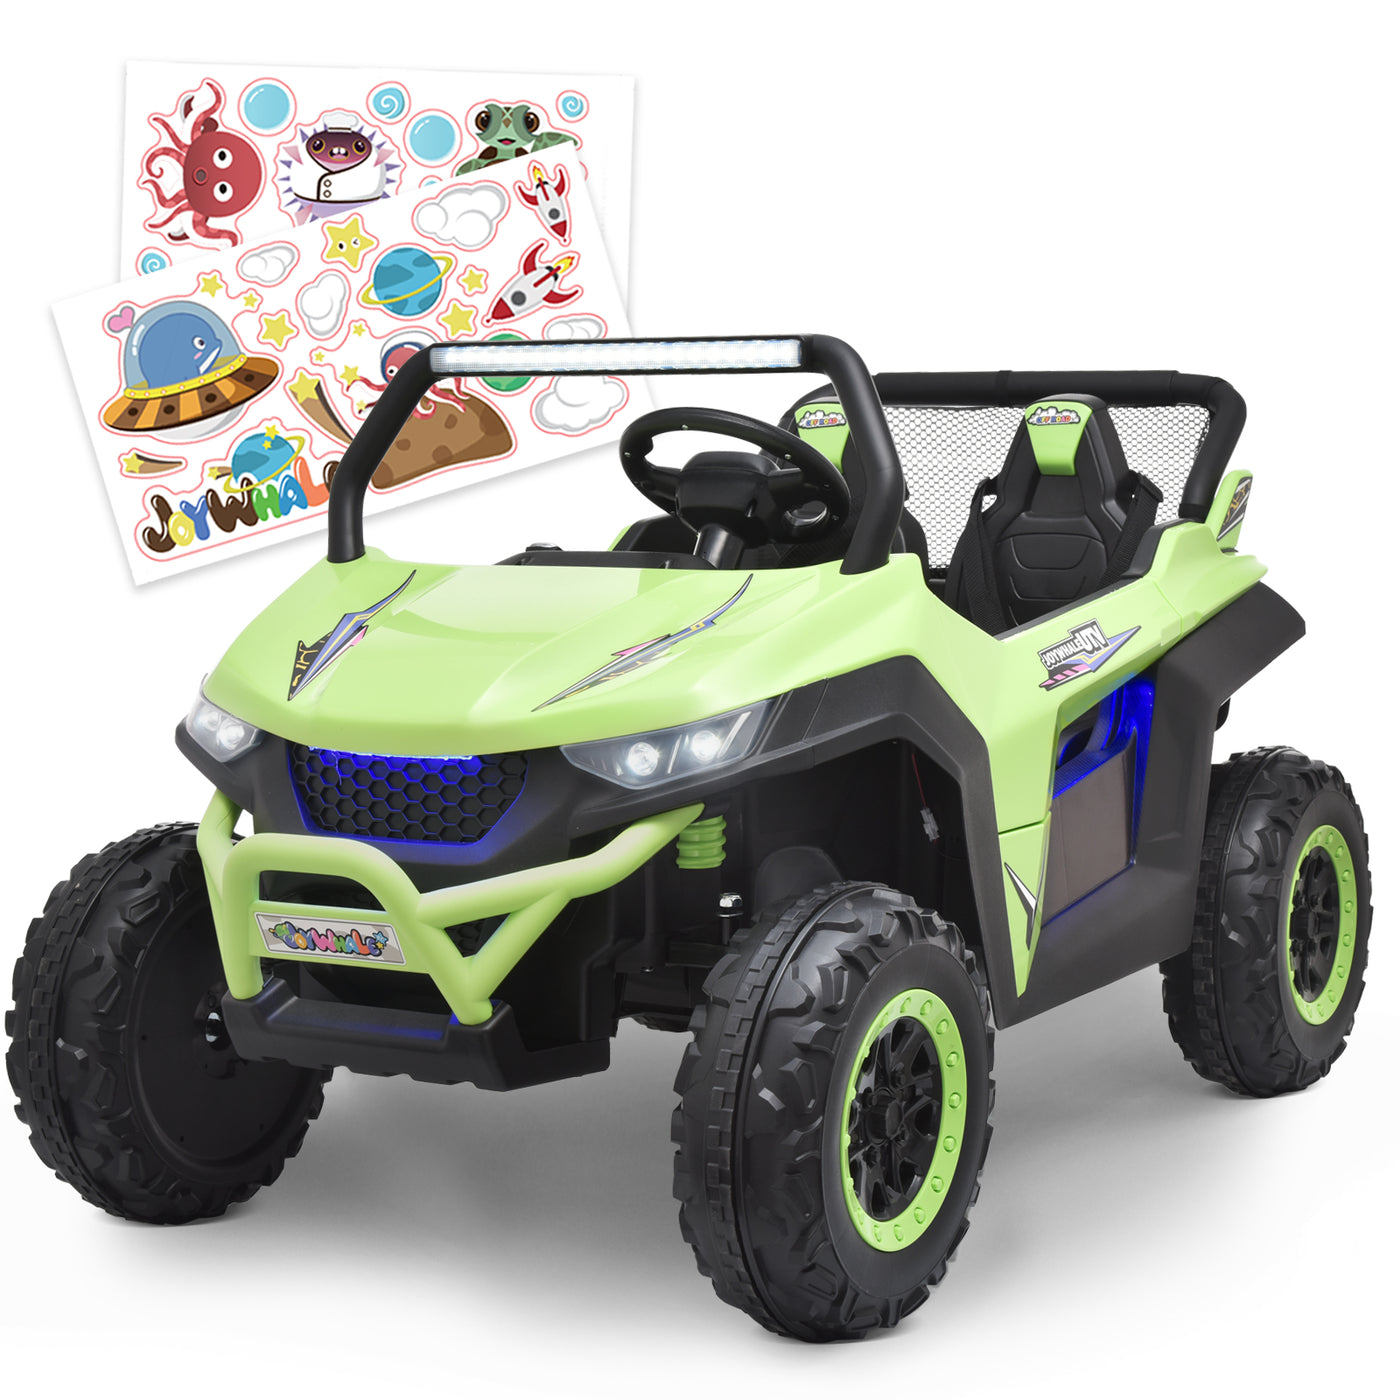 Joywhale 12V 2 Seater Kids Ride on UTV Battery Powered Electric Car for Kids Ages 3-8, with DIY Sticker, Remote Control & Bright Headlights, DP-U20C